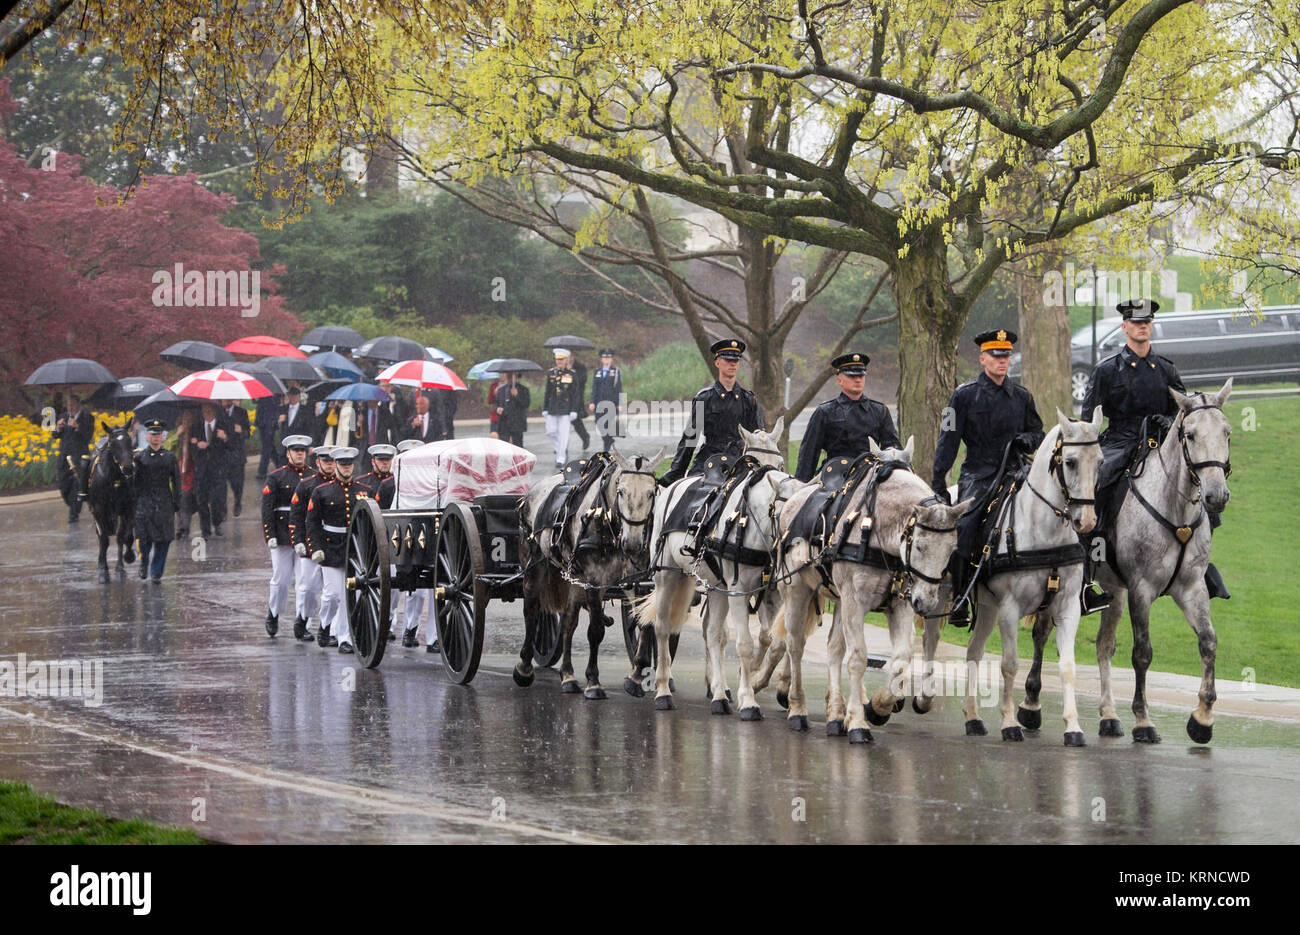 A horse drawn caisson carries former astronaut and U.S. Senator John Glenn to his final resting place during the interment ceremony at Arlington National Cemetery on Thursday, April 6, 2017 in Virginia. Glenn was the first American to orbit Earth on Feb. 20, 1962, in a five-hour flight aboard the Friendship 7 spacecraft. In 1998, he broke another record by returning to space at the age of 77 on the Space Shuttle Discovery. Photo Credit: (NASA/Aubrey Gemignani) John Glenn Interment (NHQ201704060001) Stock Photo